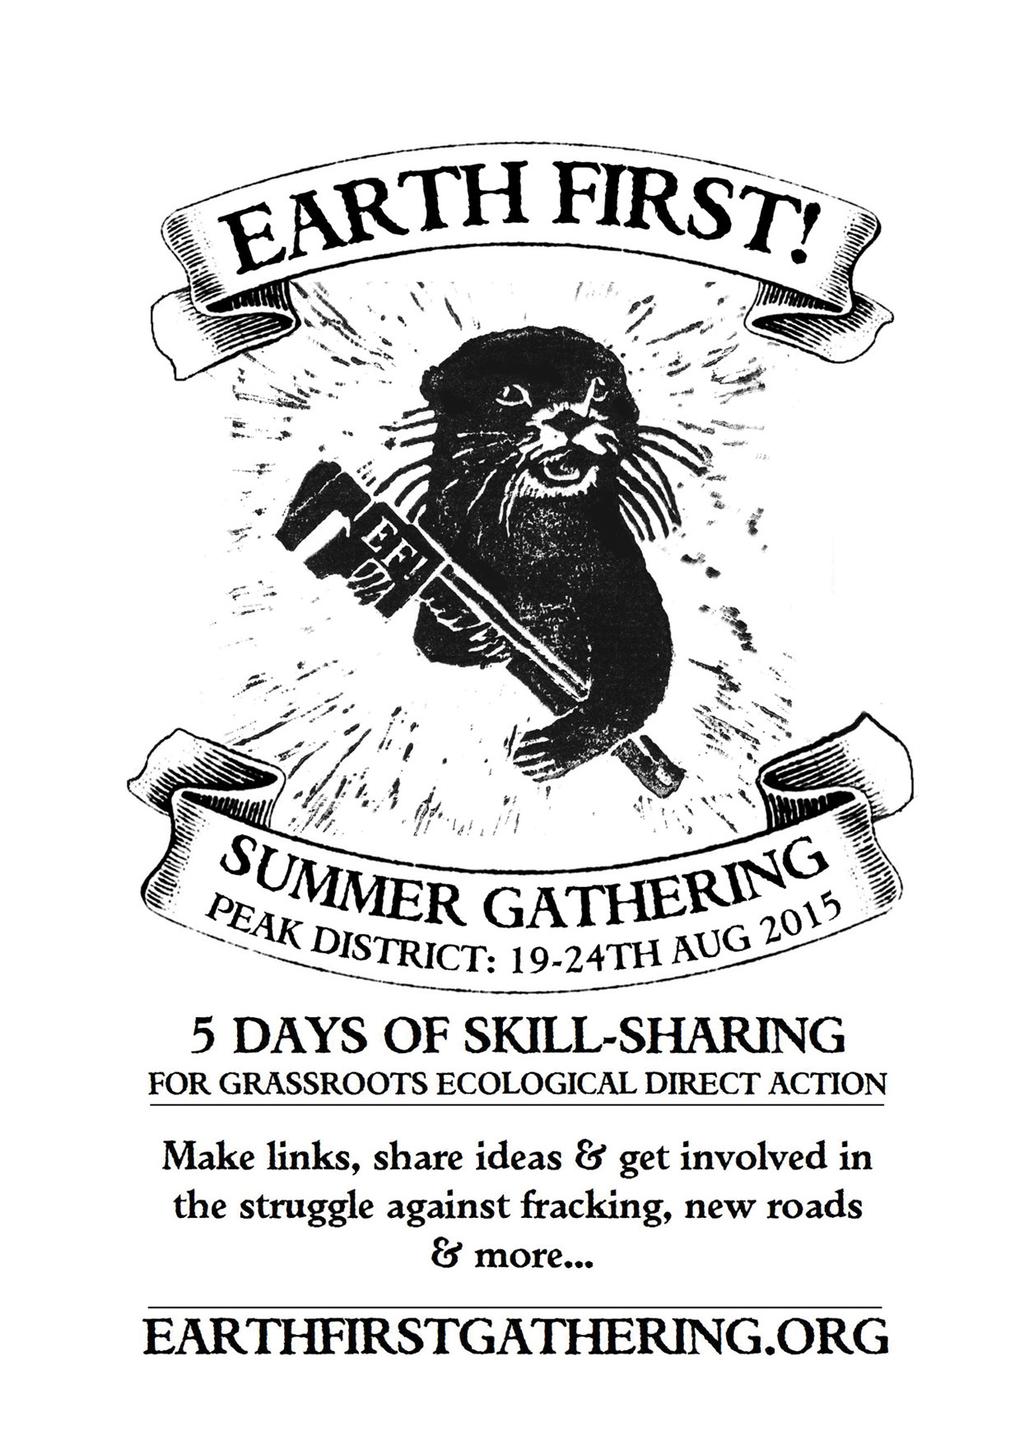 The Summer Gathering is 5 days of workshops, networking, skill sharing and planning actions at a low impact eco-living camp organised non-hierarchically.